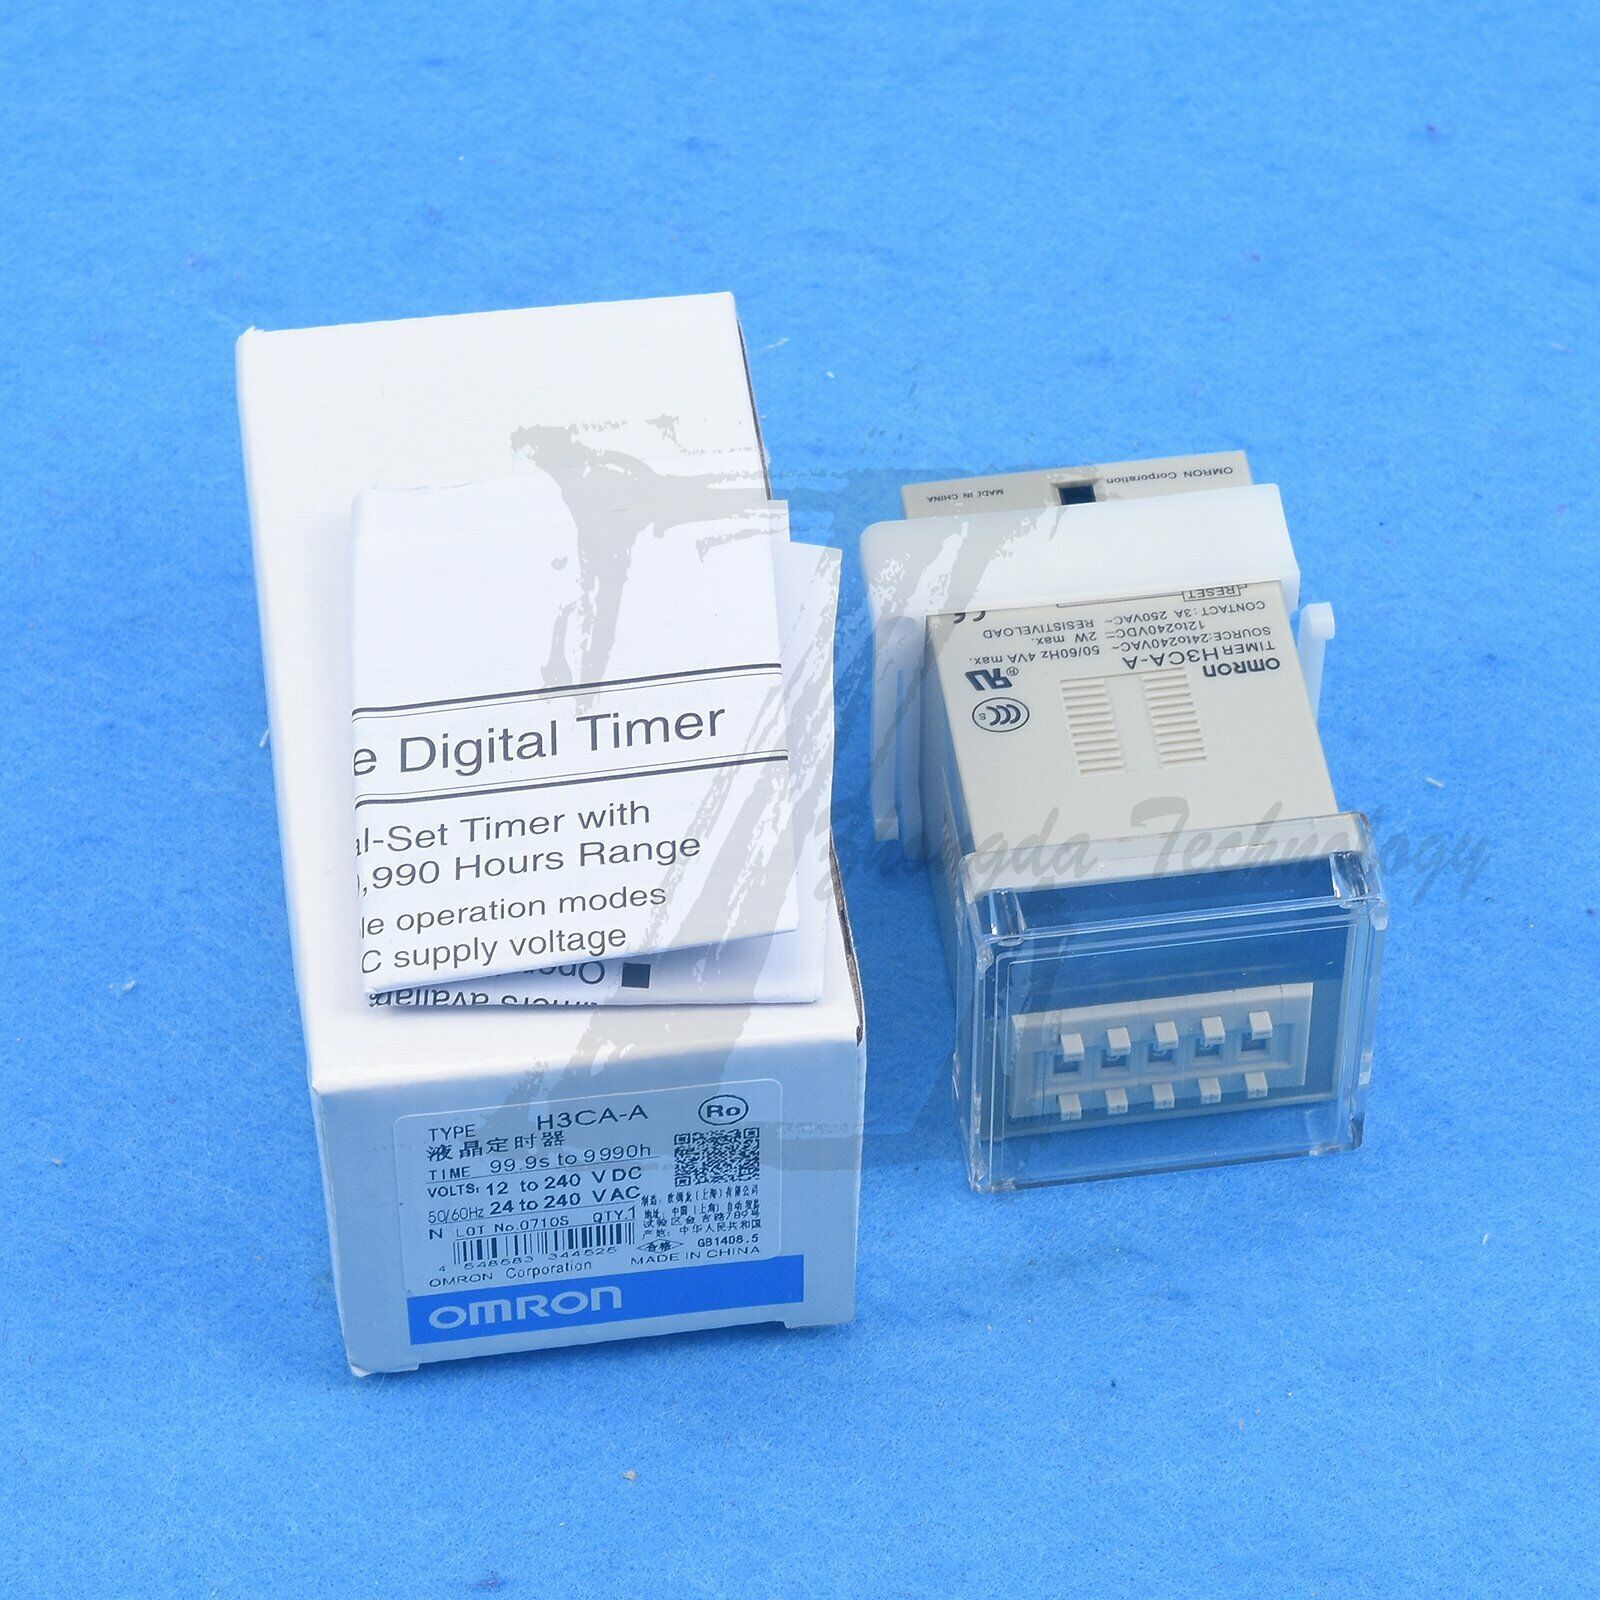 Omron H3CA-A Solid State Electronic Timer 12-240VDC/24-240VAC